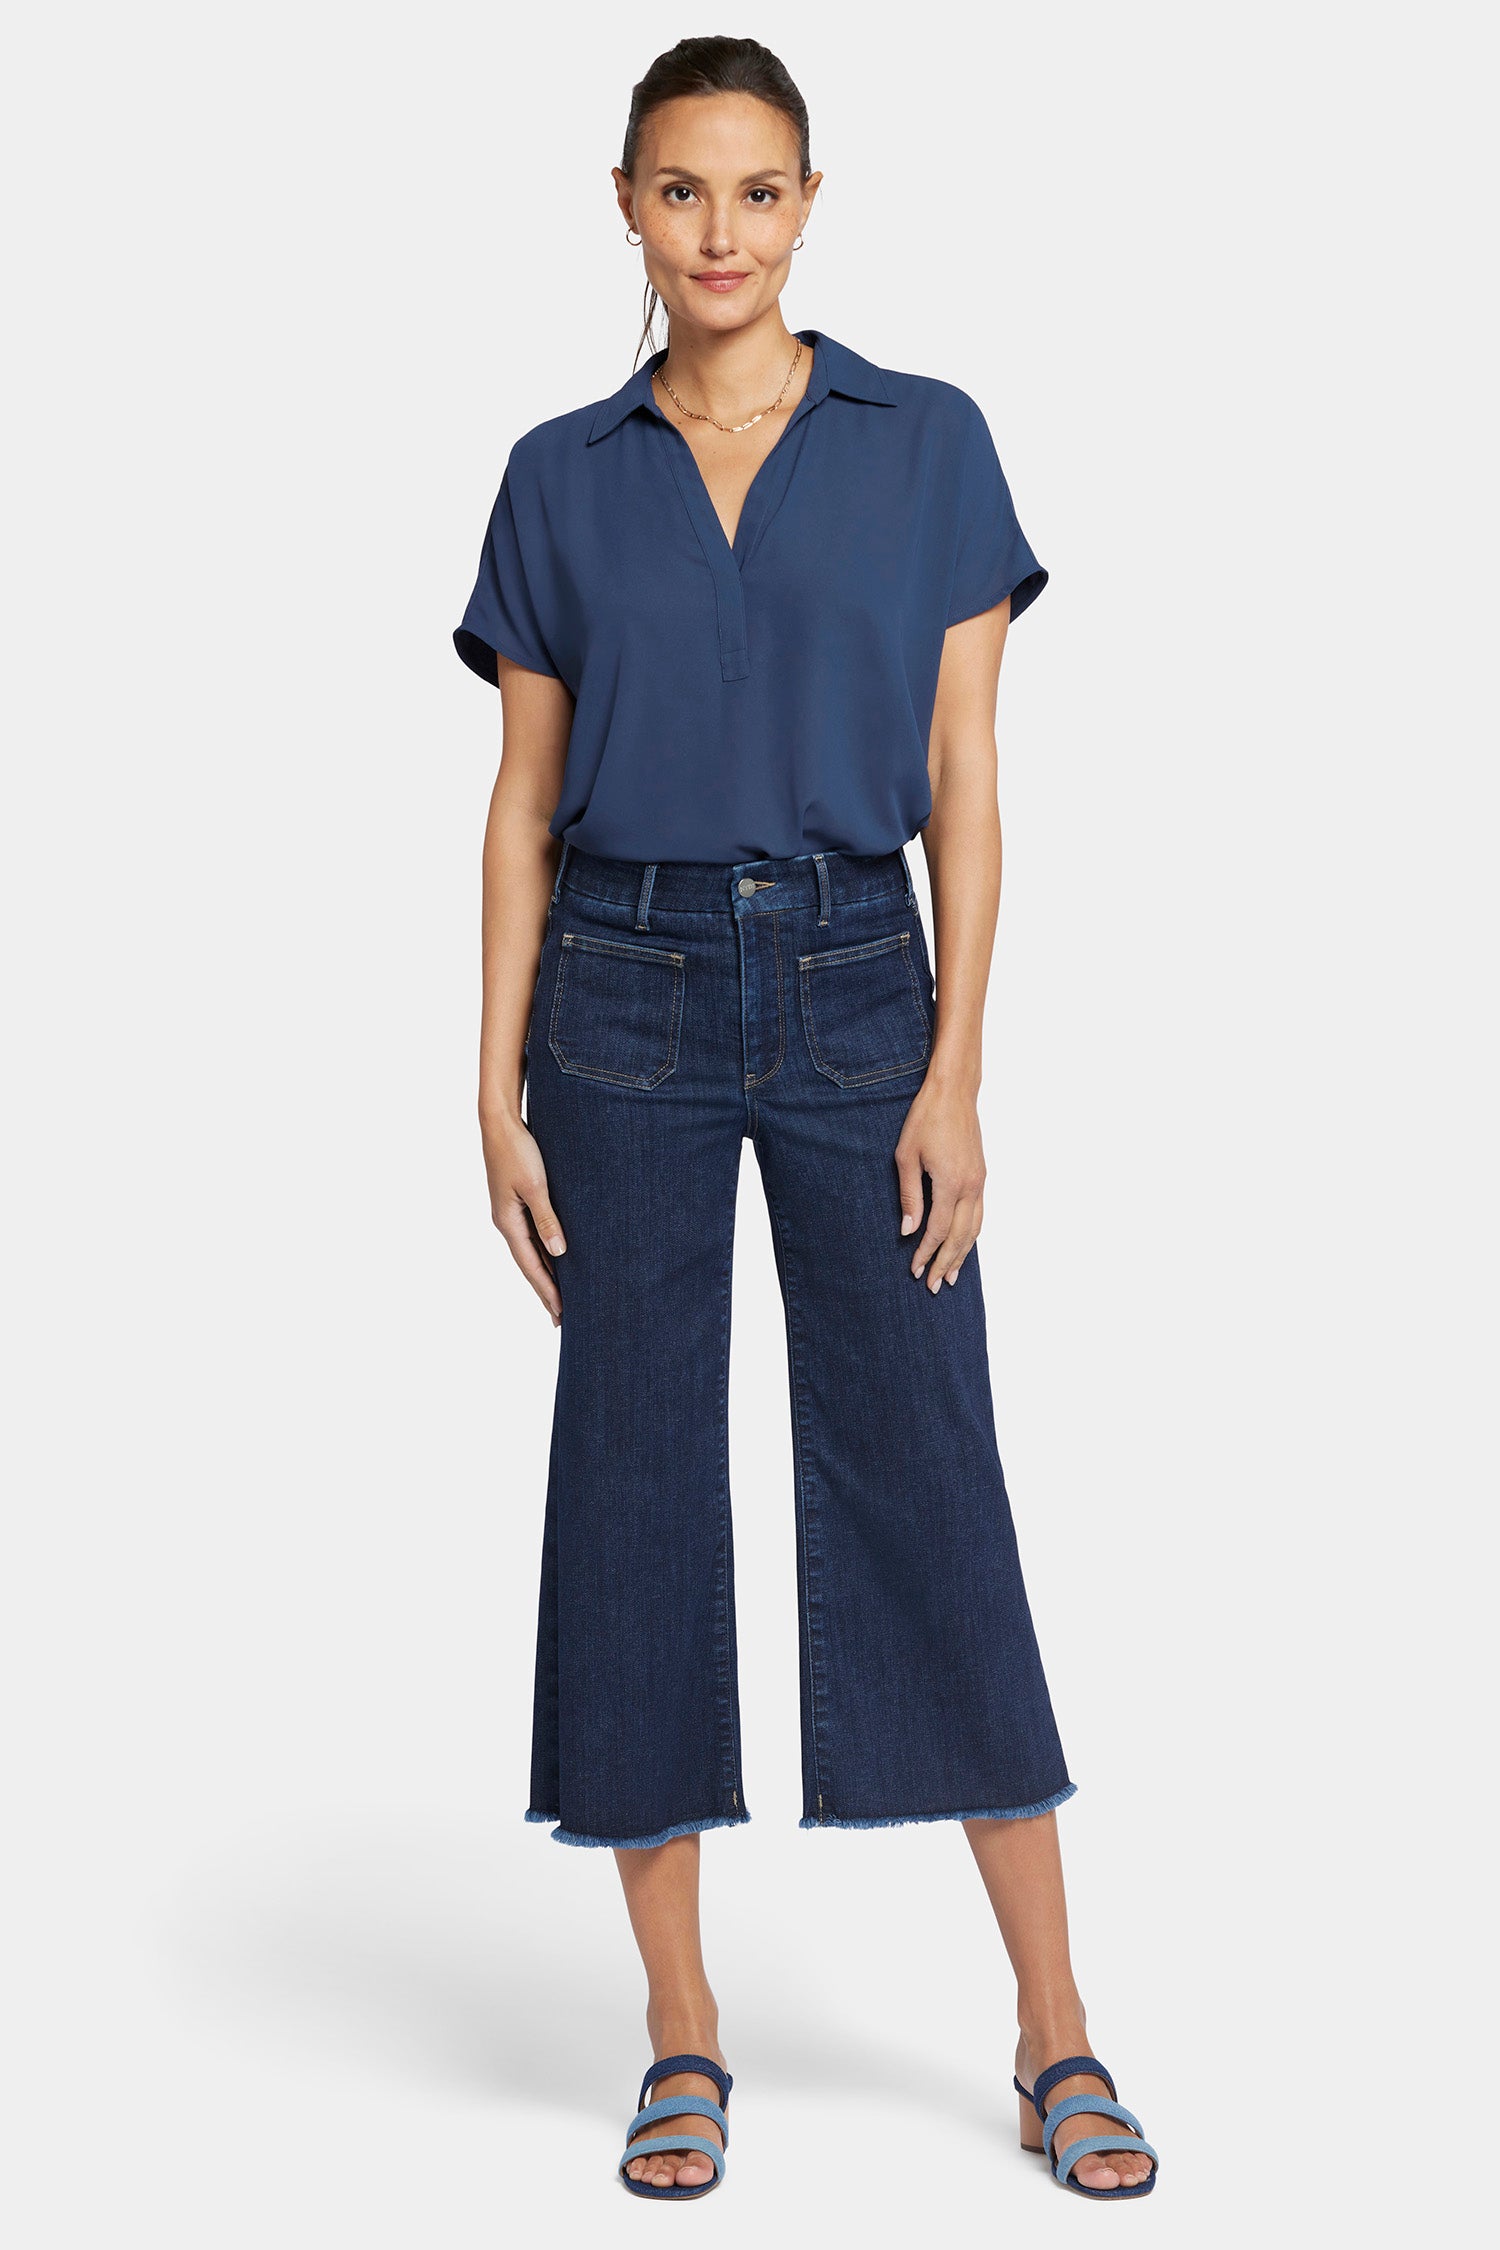 Patchie Wide Leg Capri Jeans With Frayed Hems - Sublime Blue